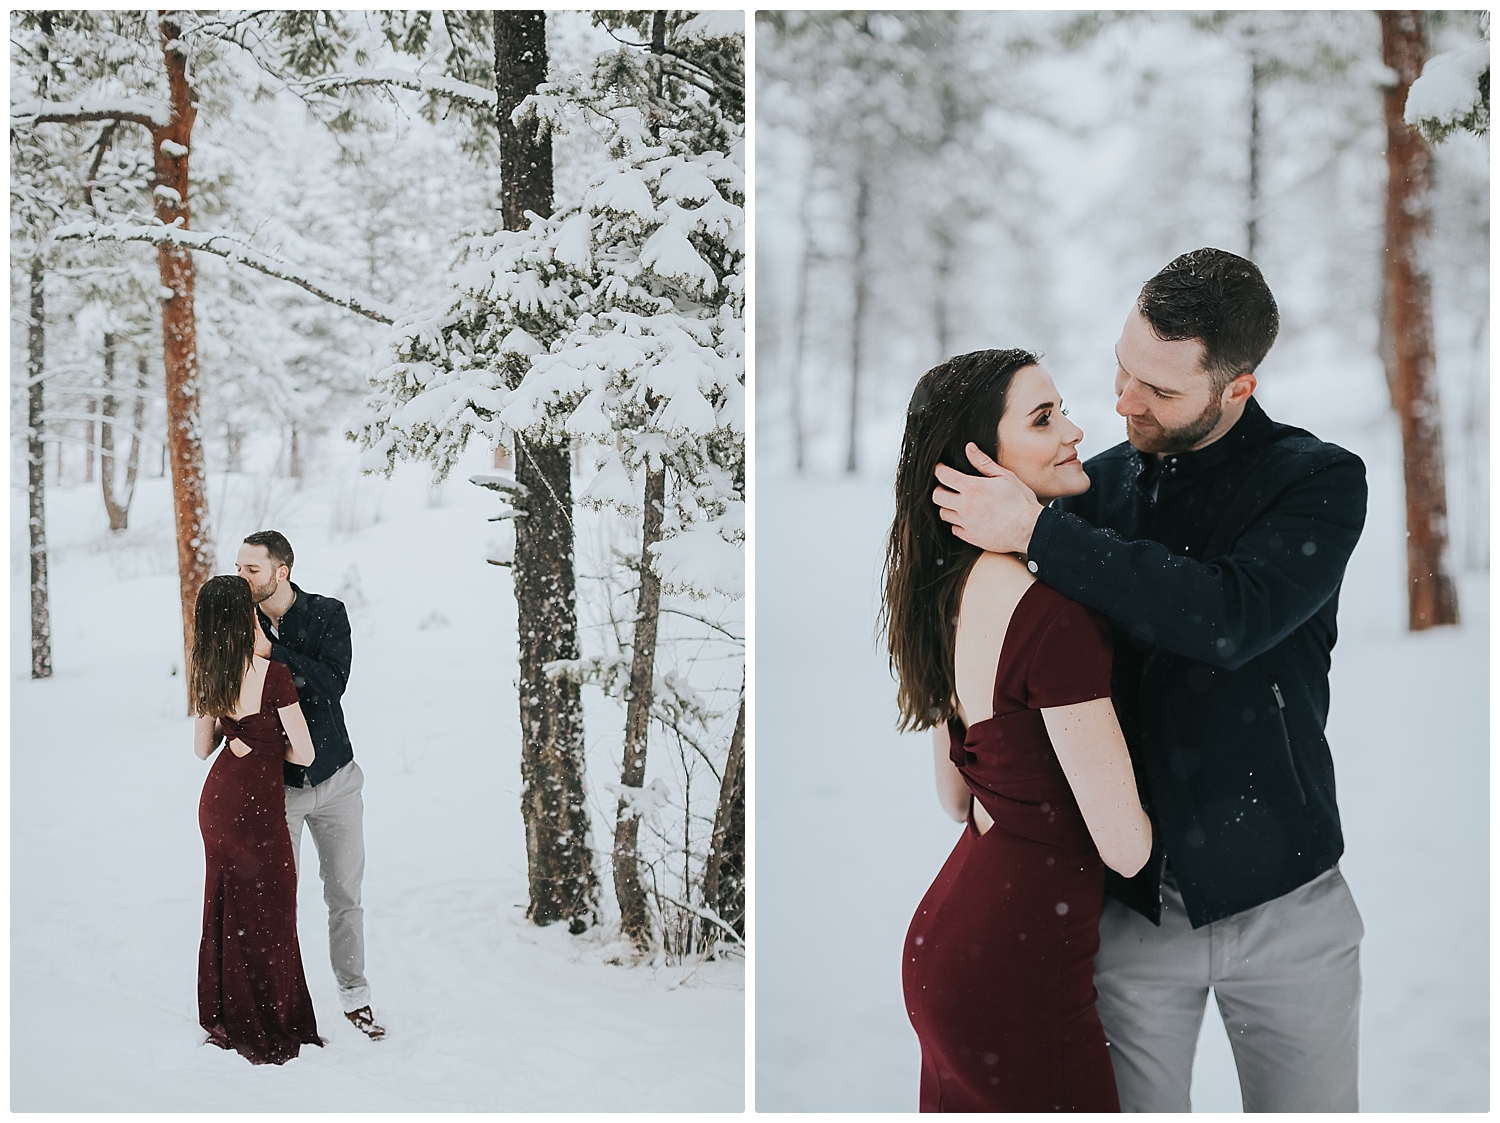 Snowy Engagement pictures, snowy engagement session, kelowna wedding photographer, kelowna engagement photographer, okanagan engagement photographer, okanagan wedding photographer, Heatherly Photography, intimate engagement photography, lifestyle engagement photography, indie couple, mountain engagement, burgundy dress, Lulus dress, candid photography, natural photography